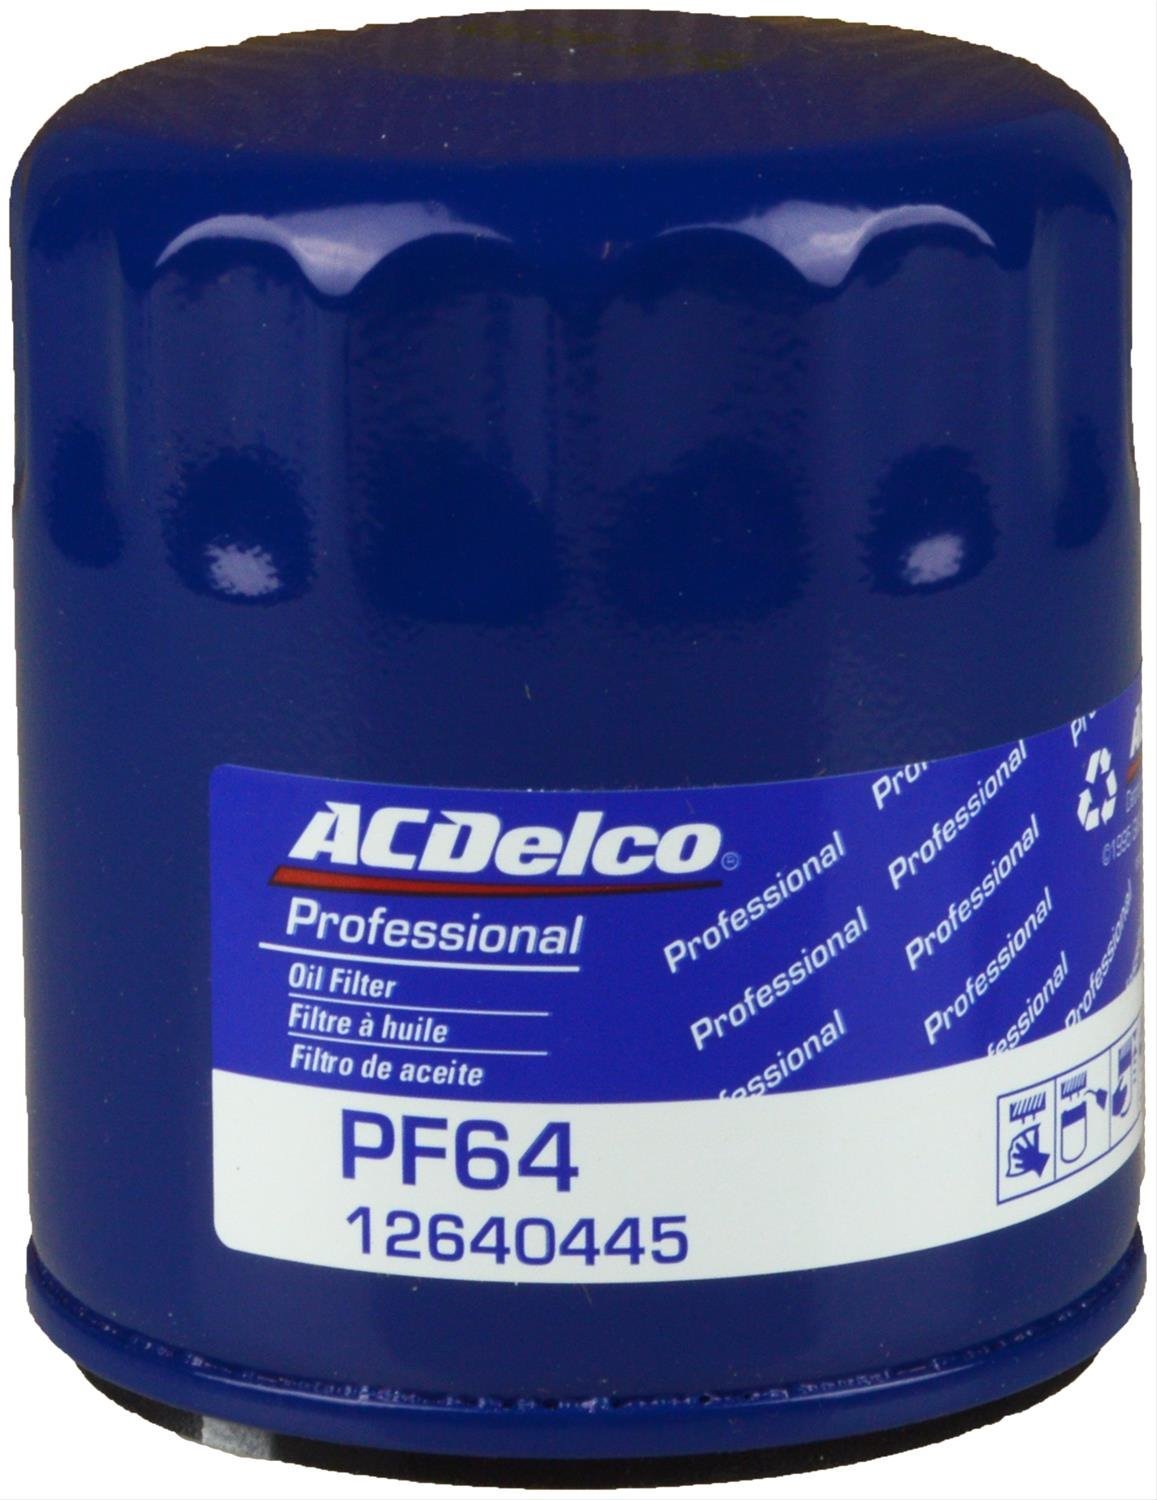 PF64 Professional Engine Oil Filter for Buick, Cadillac, Chevrolet, GMC